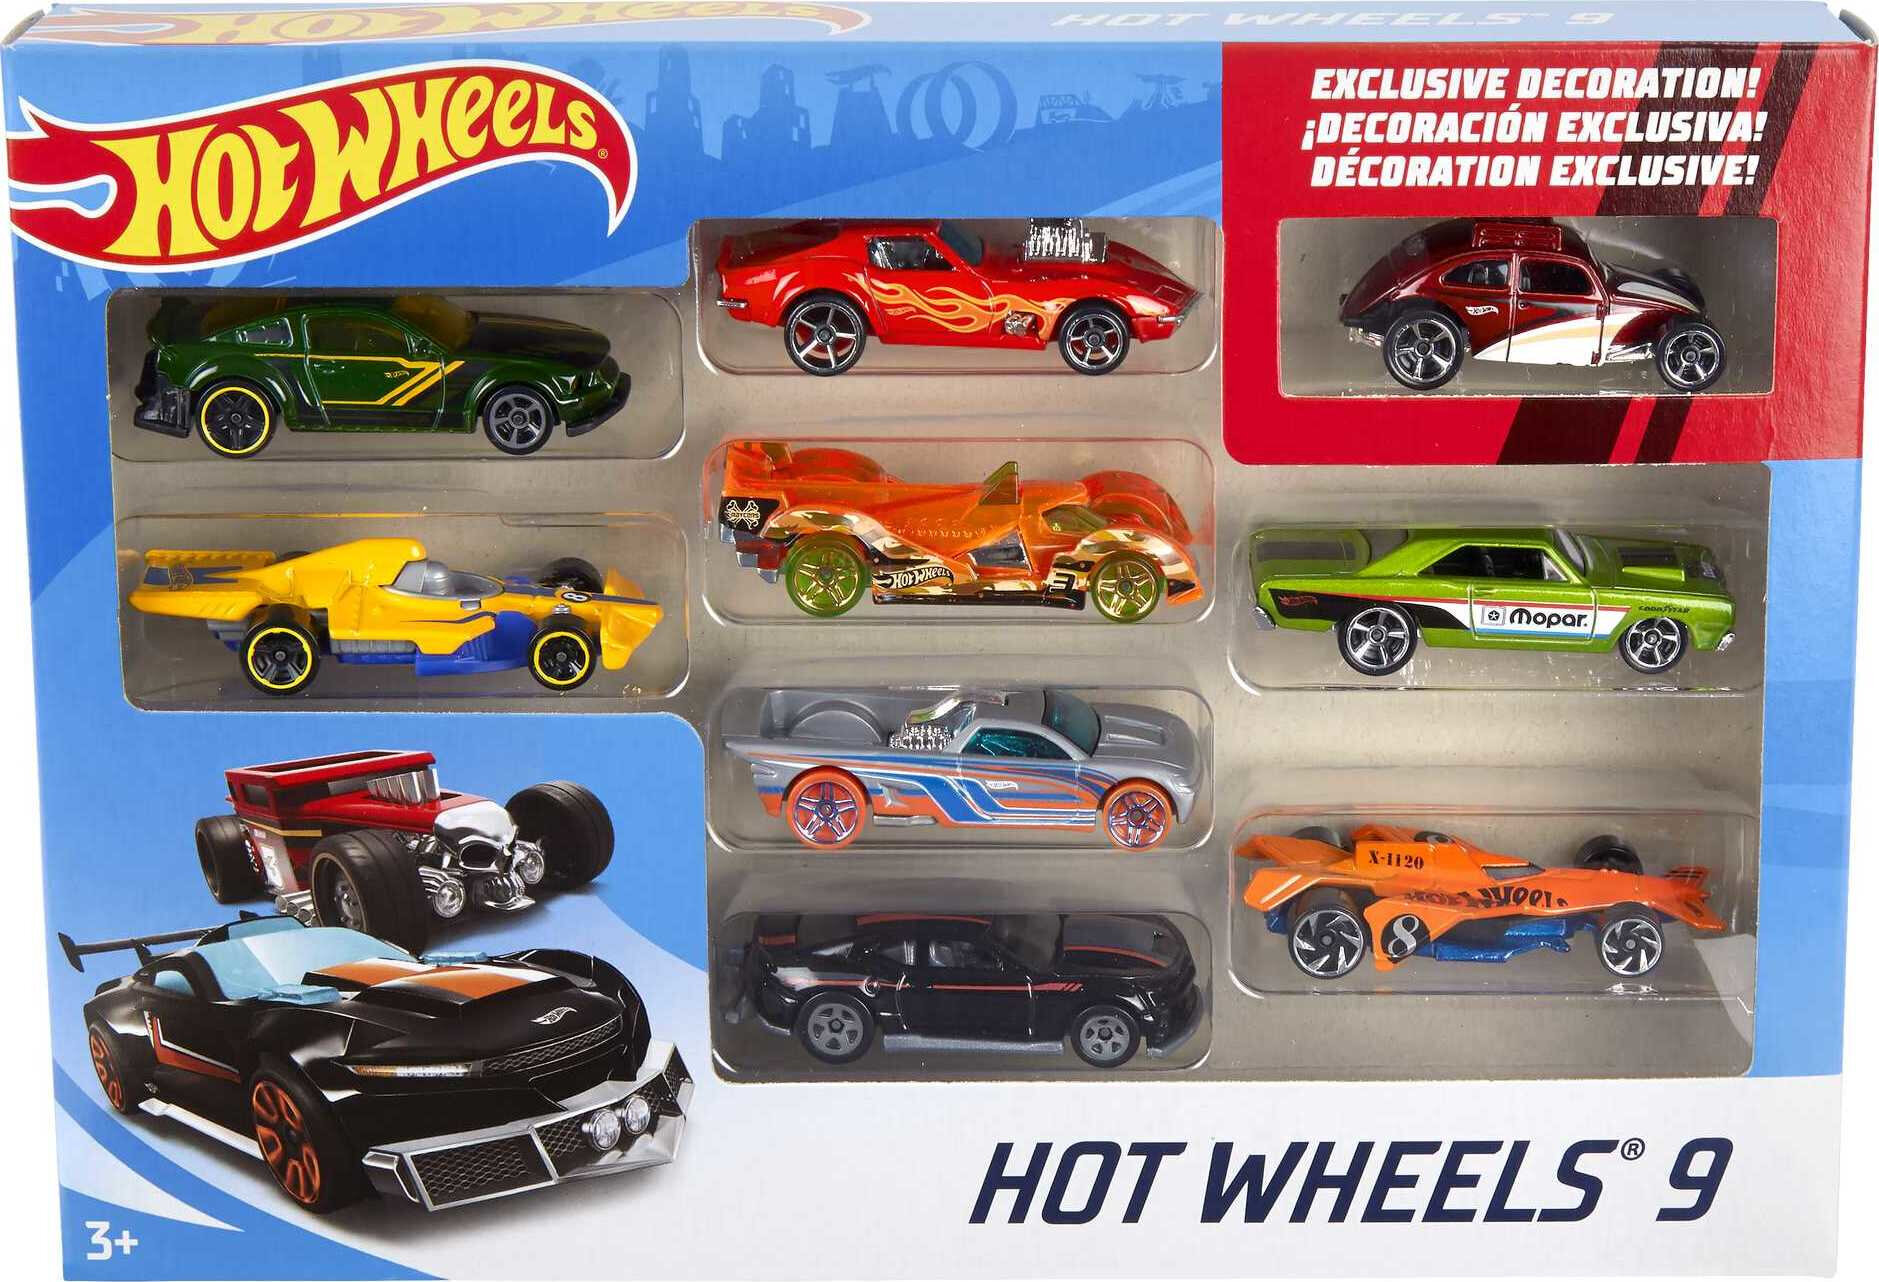 Hot Wheels Gift Set of 9 Toy Cars or Trucks in 1:64 Scale (Styles May Vary) - image 6 of 7